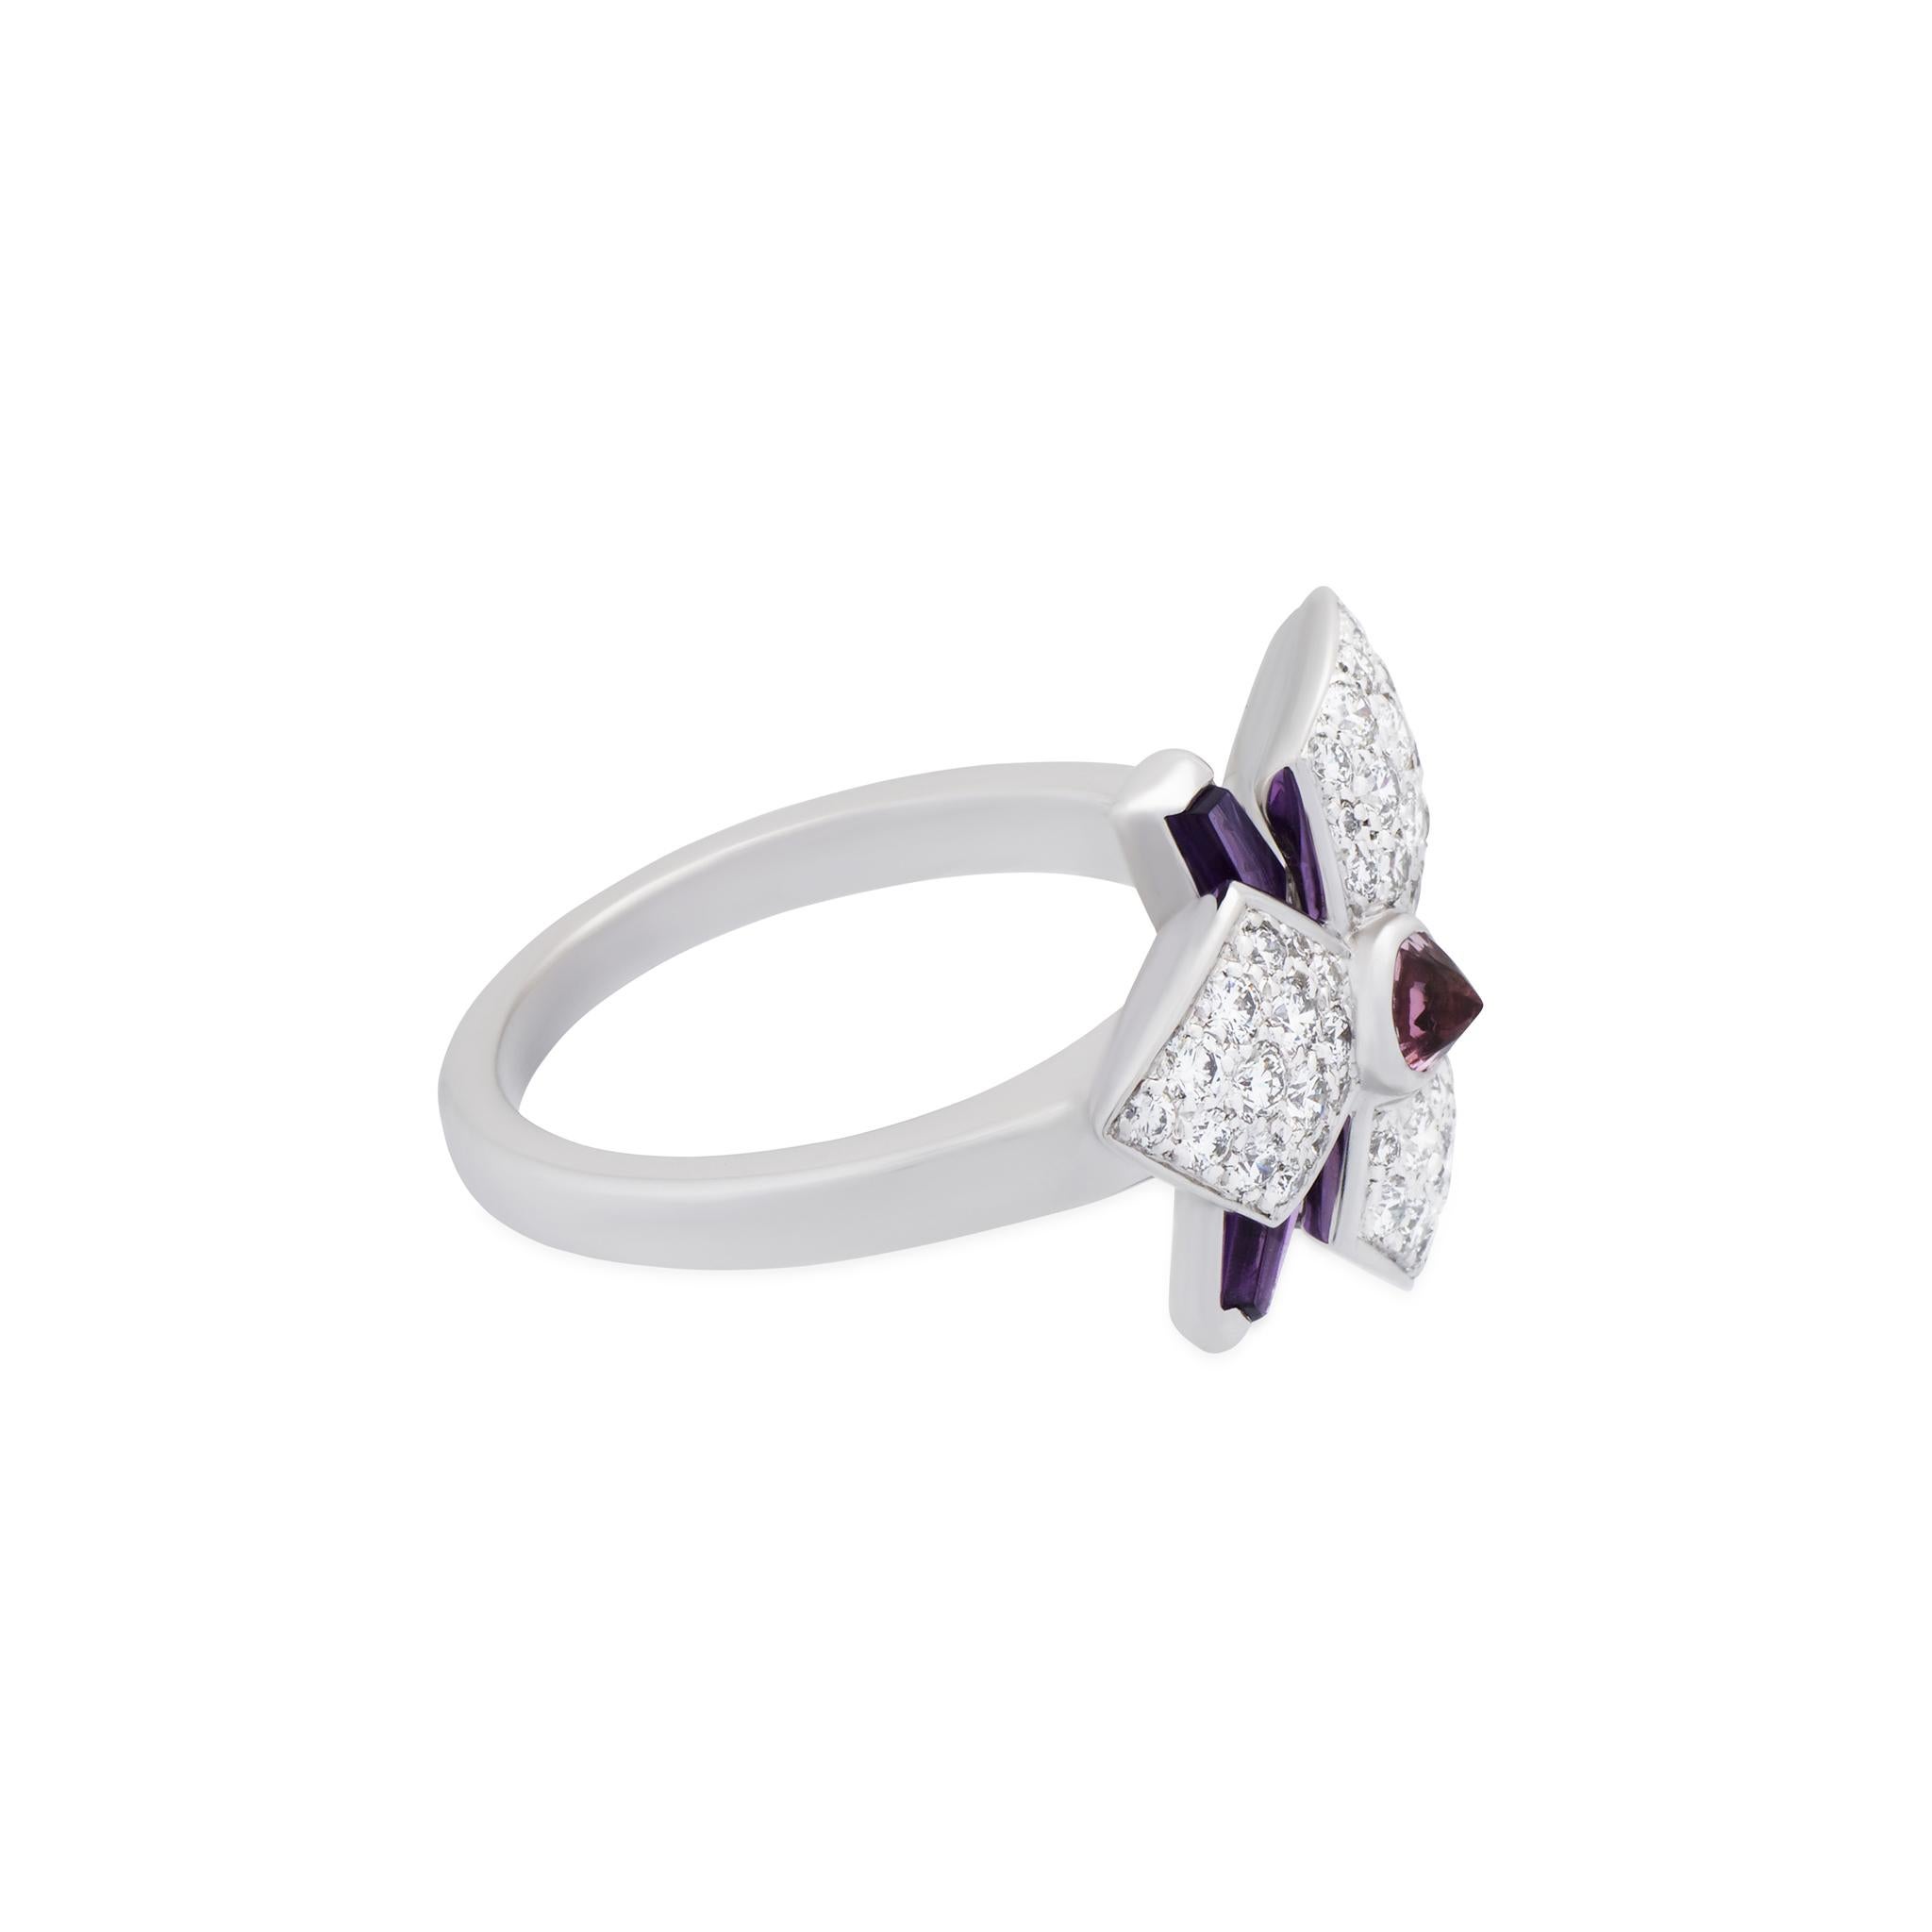 18K White Gold
Diamond: 0.52 ct twd
Total Weight: 5.9 grams
Ring Size: 4.5
